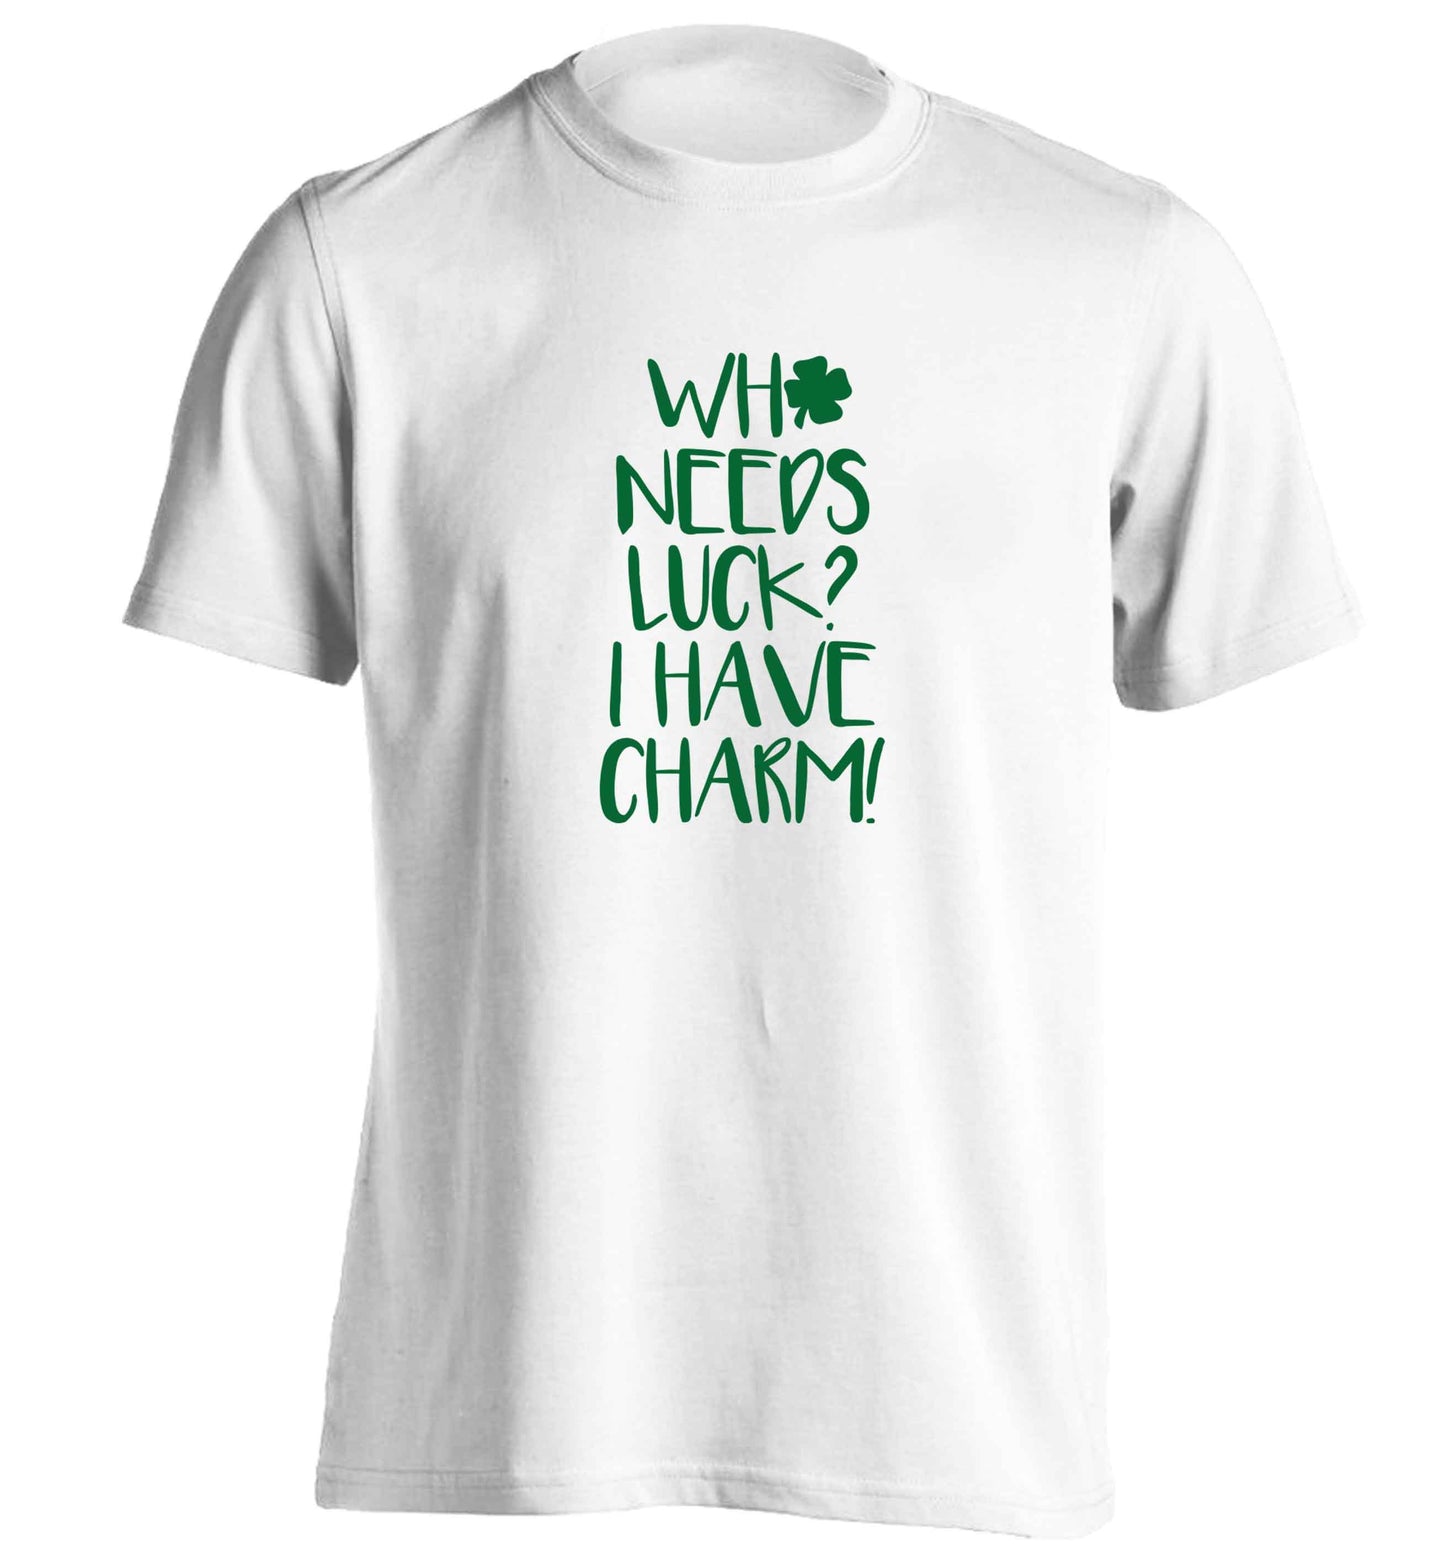 Who needs luck? I have charm! adults unisex white Tshirt 2XL